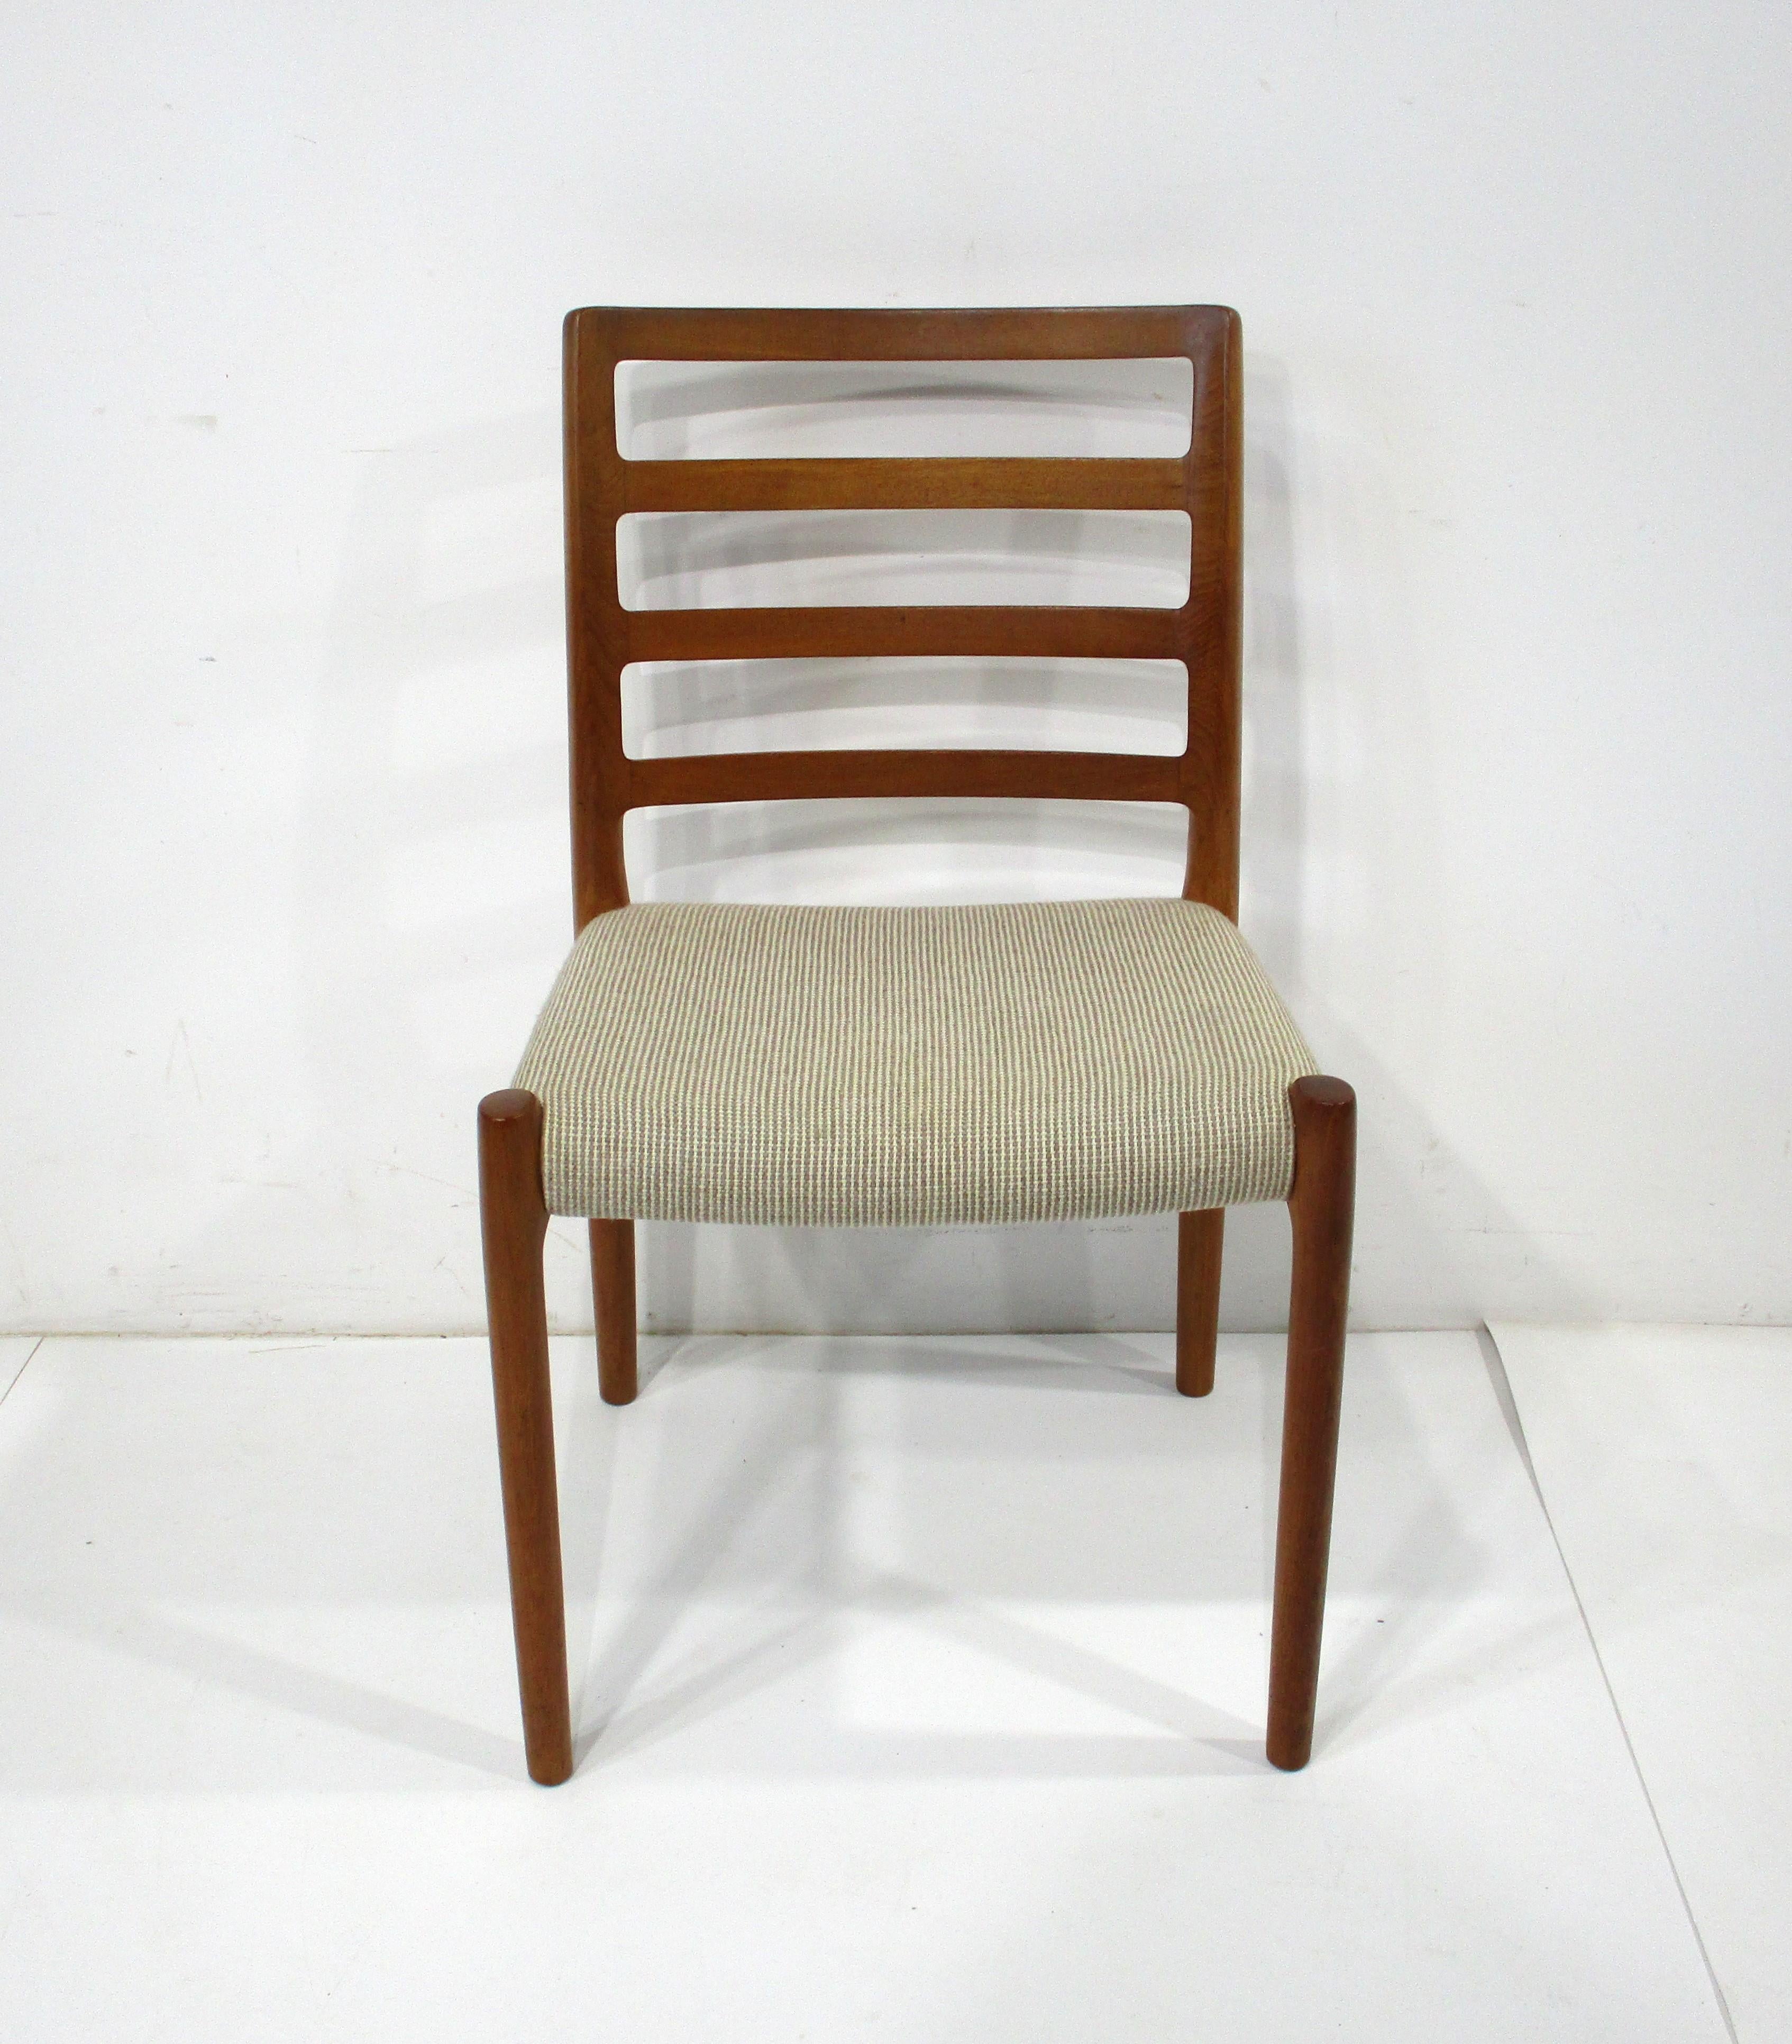 20th Century Niels Moller Teak Upholstered Dining Chairs by J L Moller Denmark  For Sale